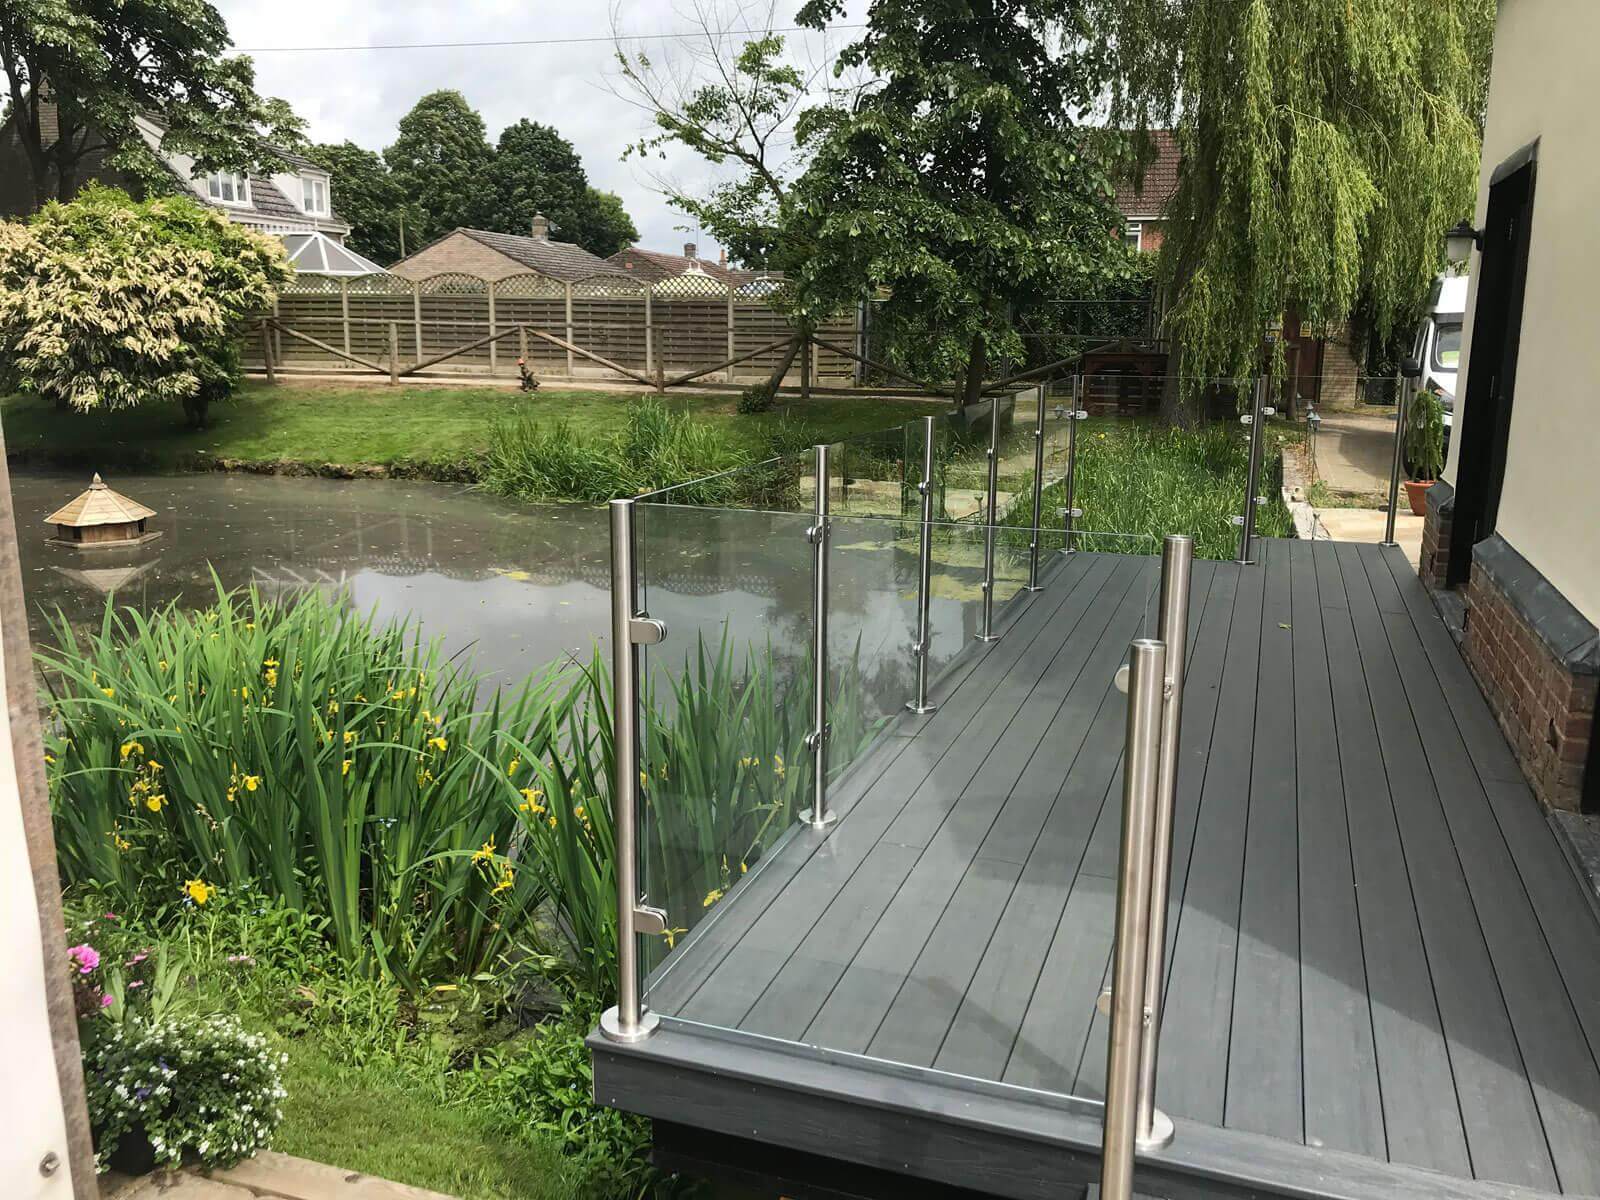 glass balustrade for decking overlooking the pond in the back garden